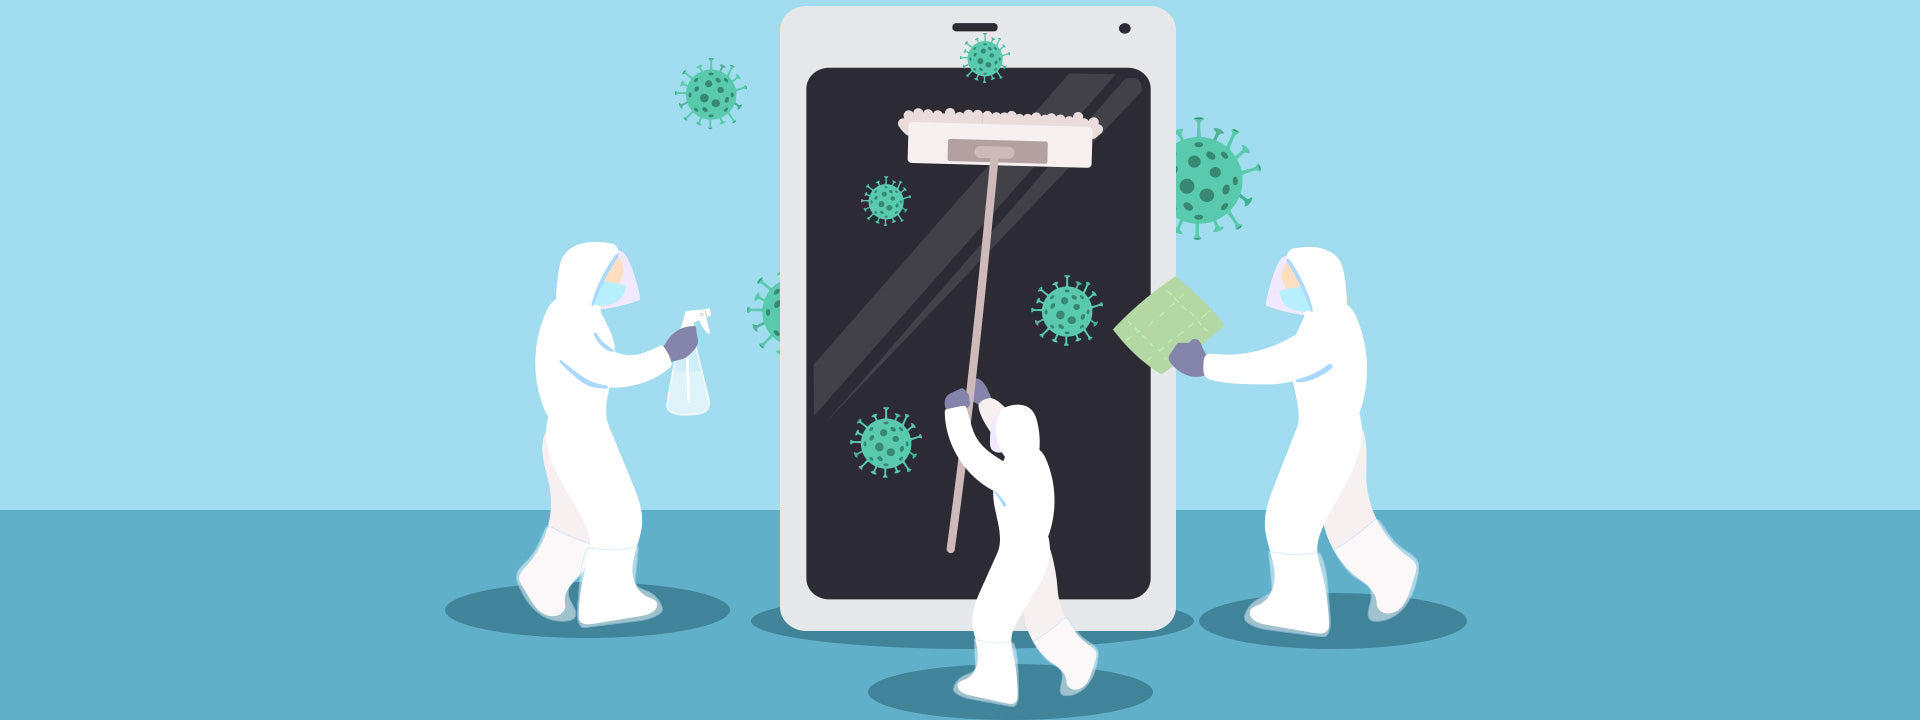 How to clean your mobile phone or tablet touch screen without damaging it